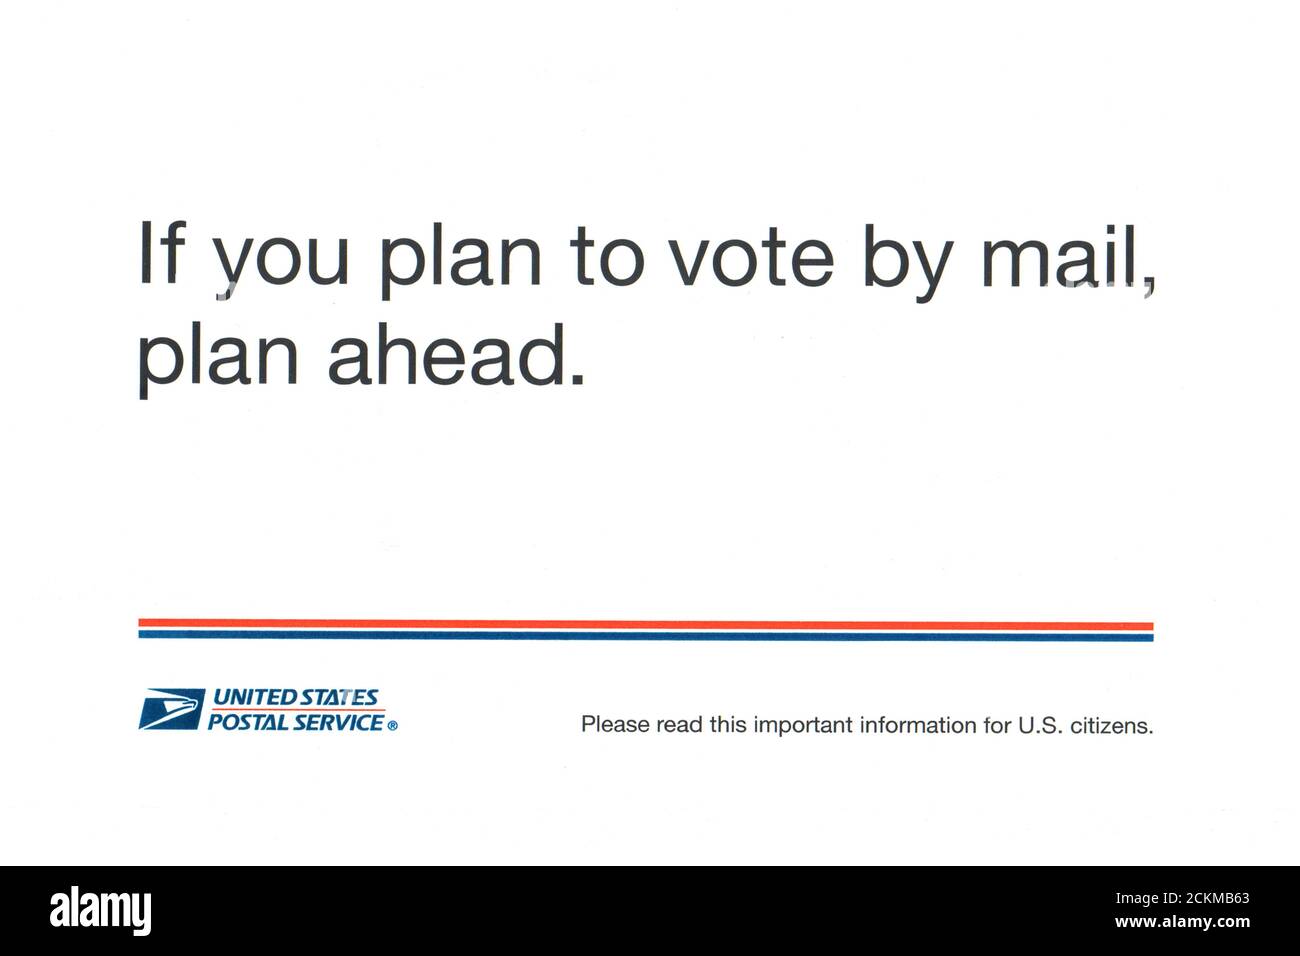 U.S. Postal Service information card for mail in voting during the 2020 elections including the Presidental voting. Stock Photo